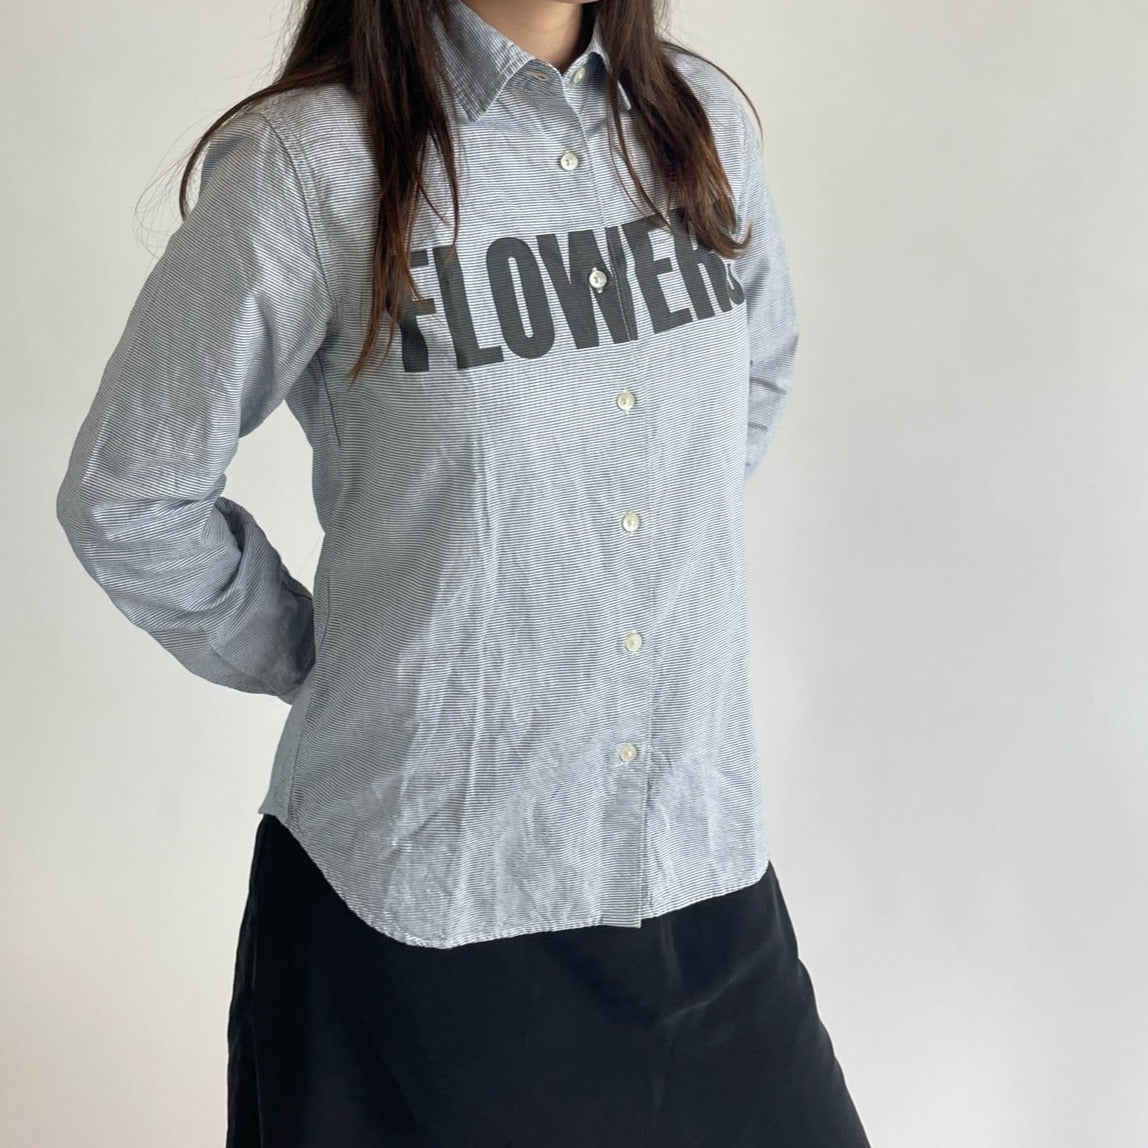 FLOWERS hysteric glamour top